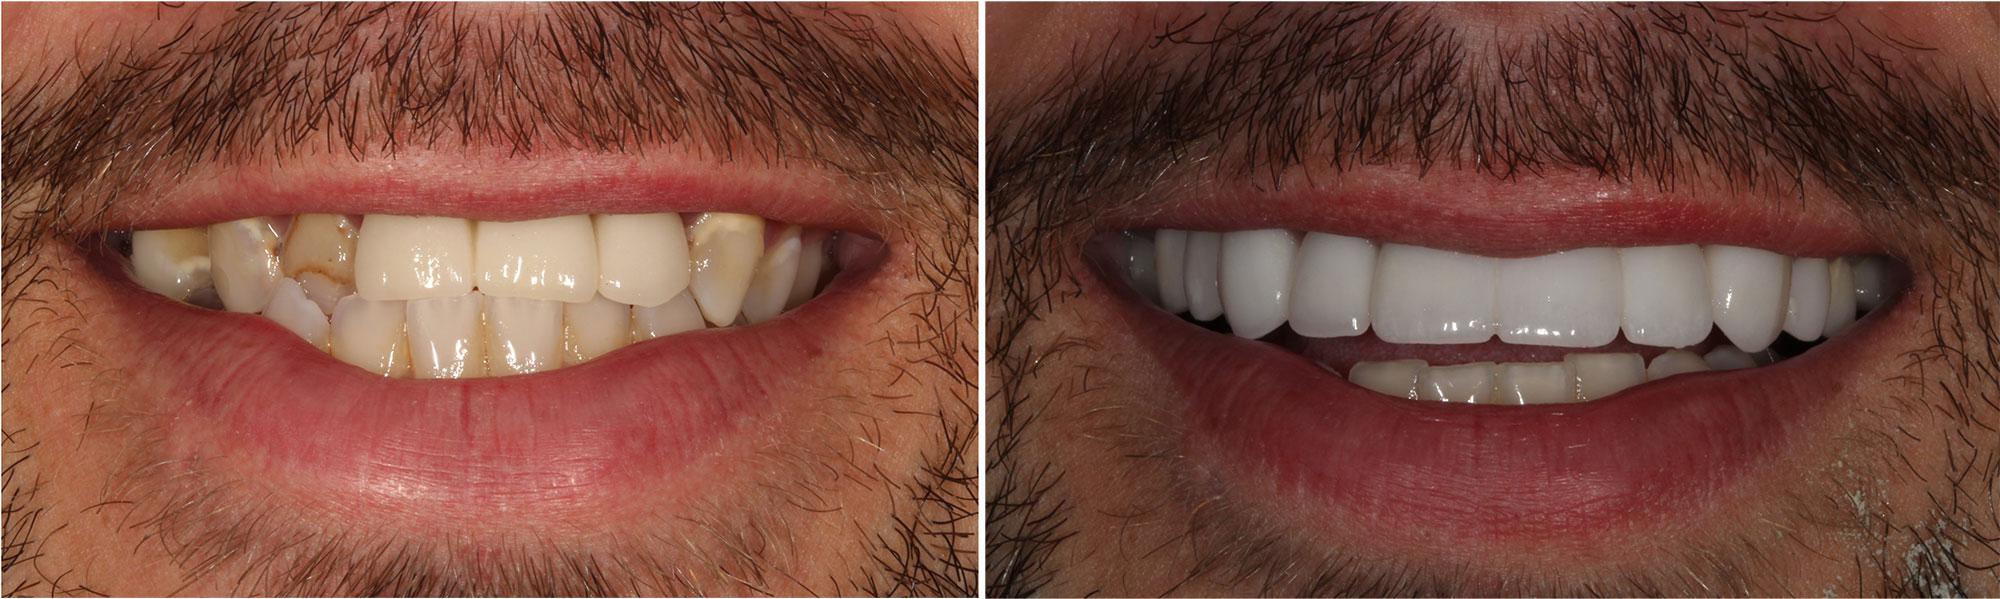 Jason Cellars, DDS used a combination of crowns and veneers to fix this patient's decay